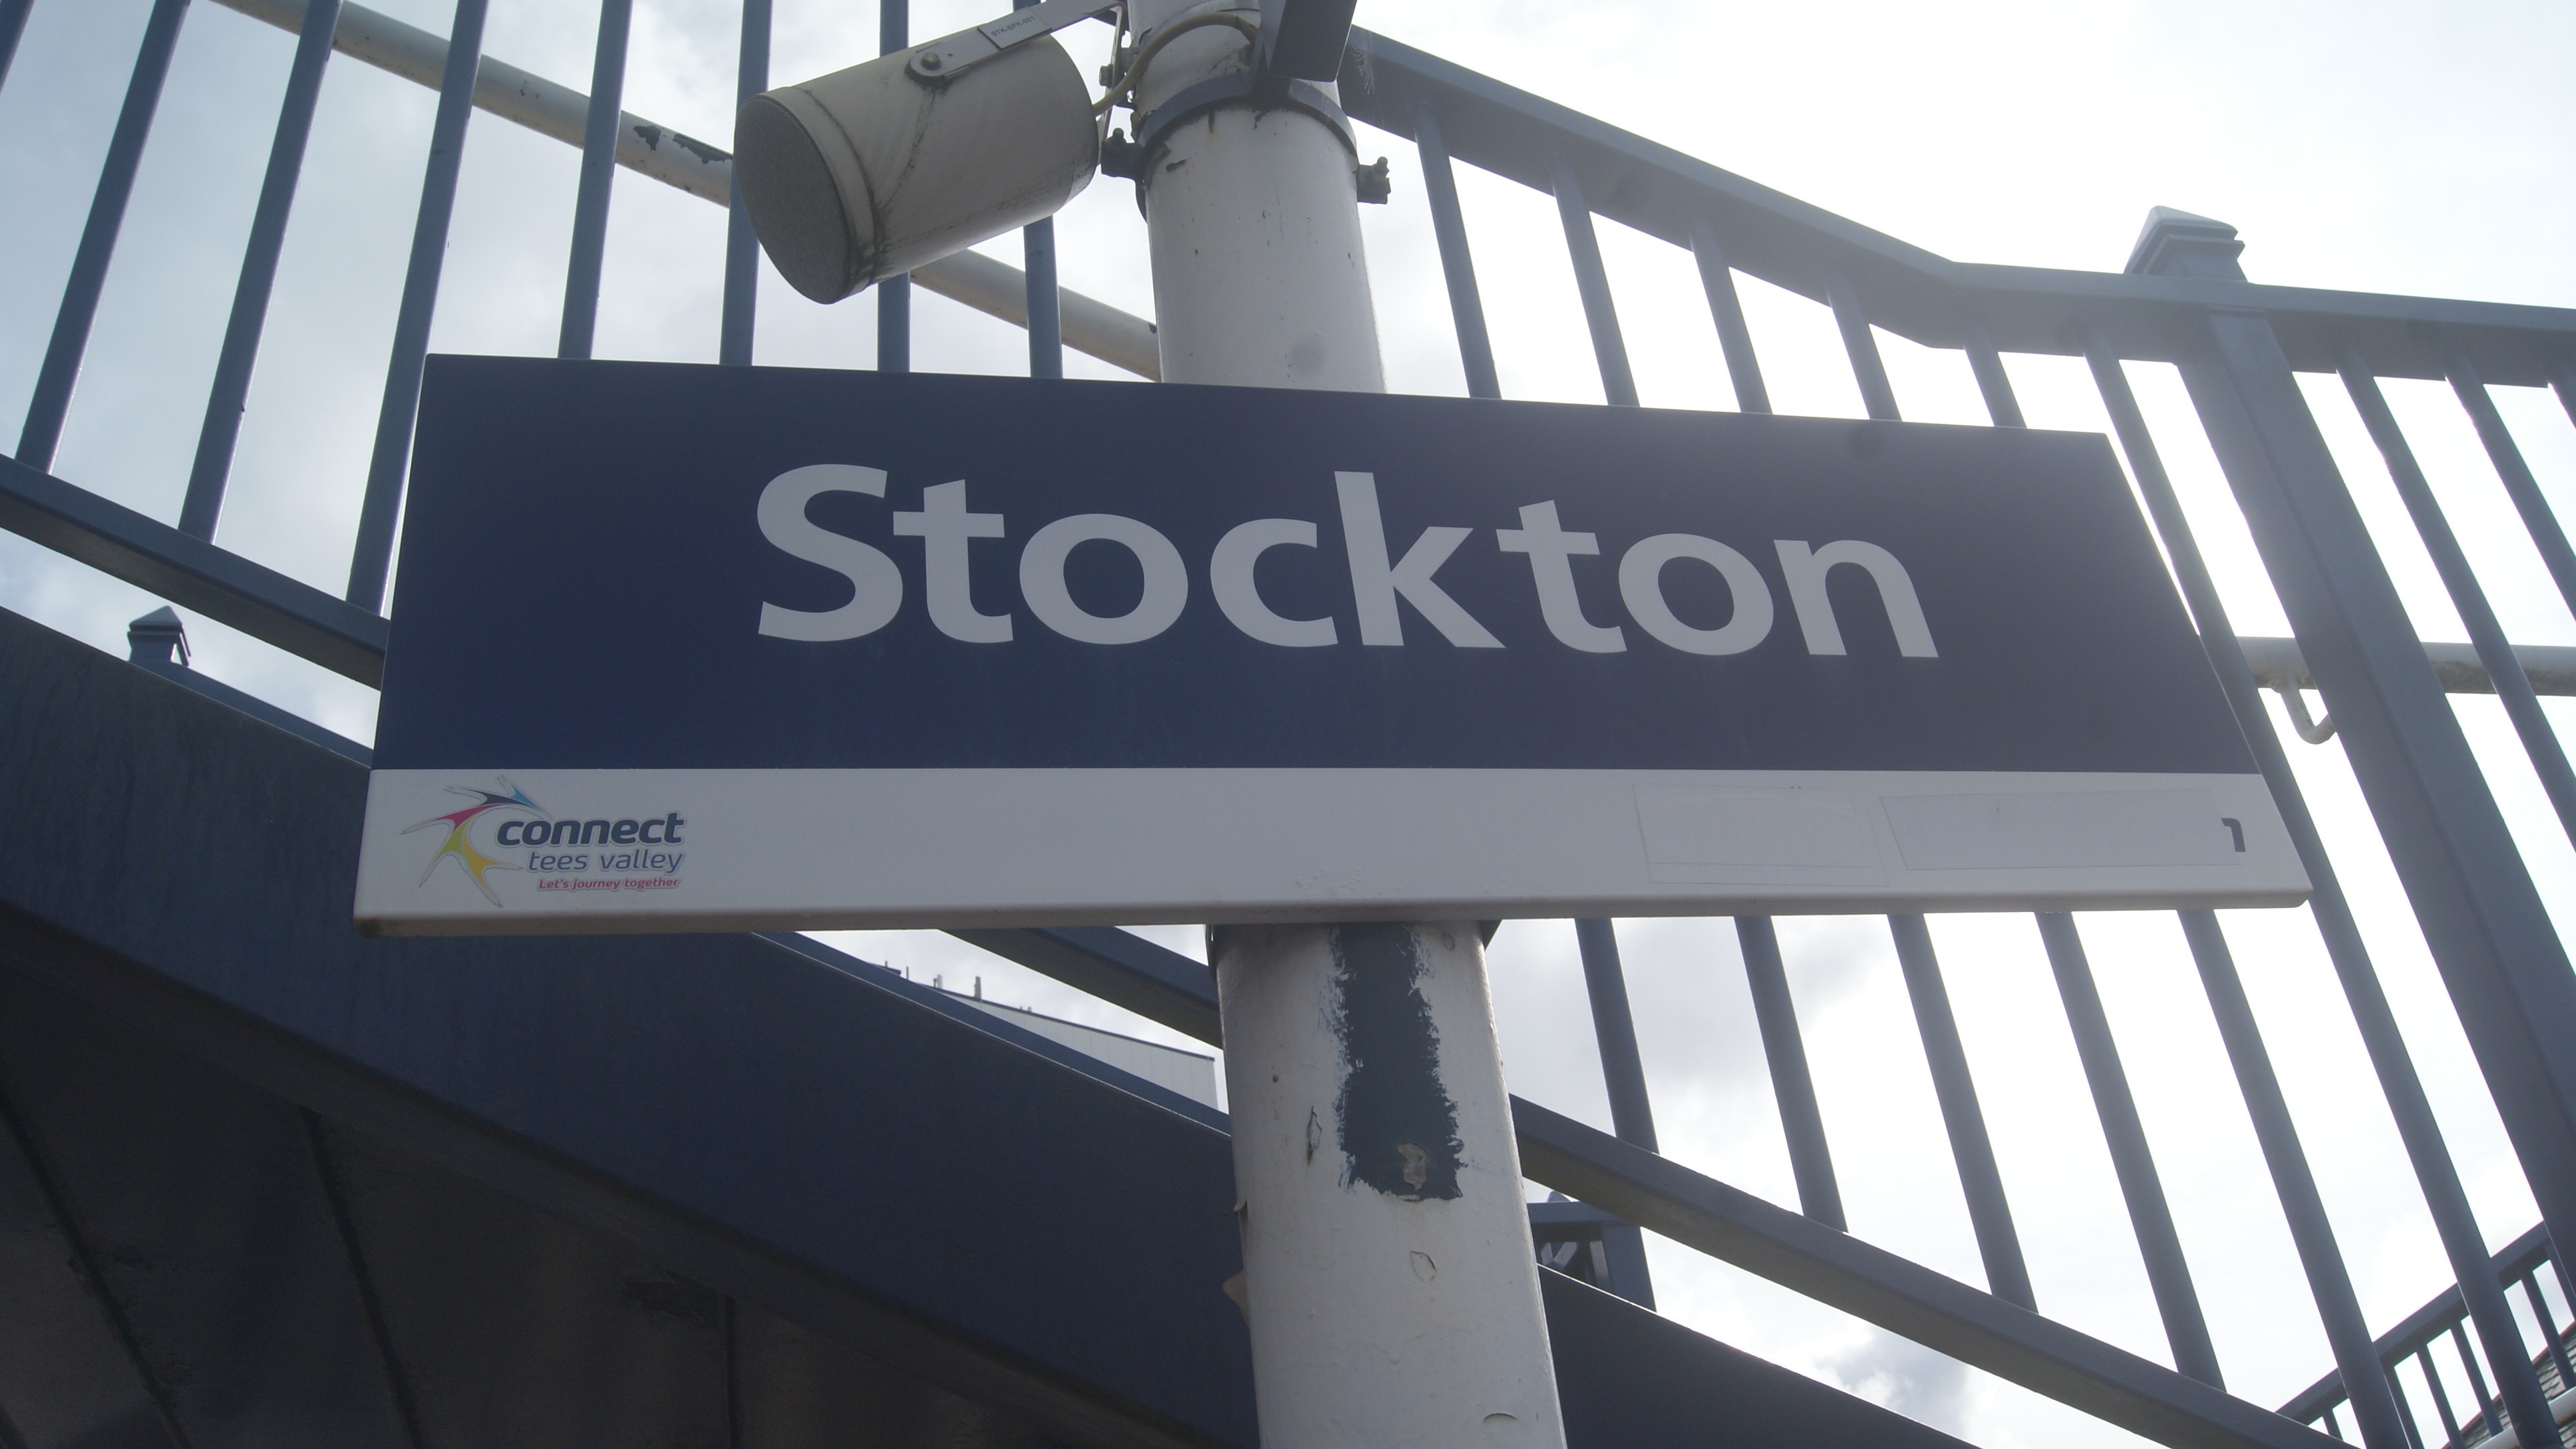 This image shows the blue and white Stockton station sign